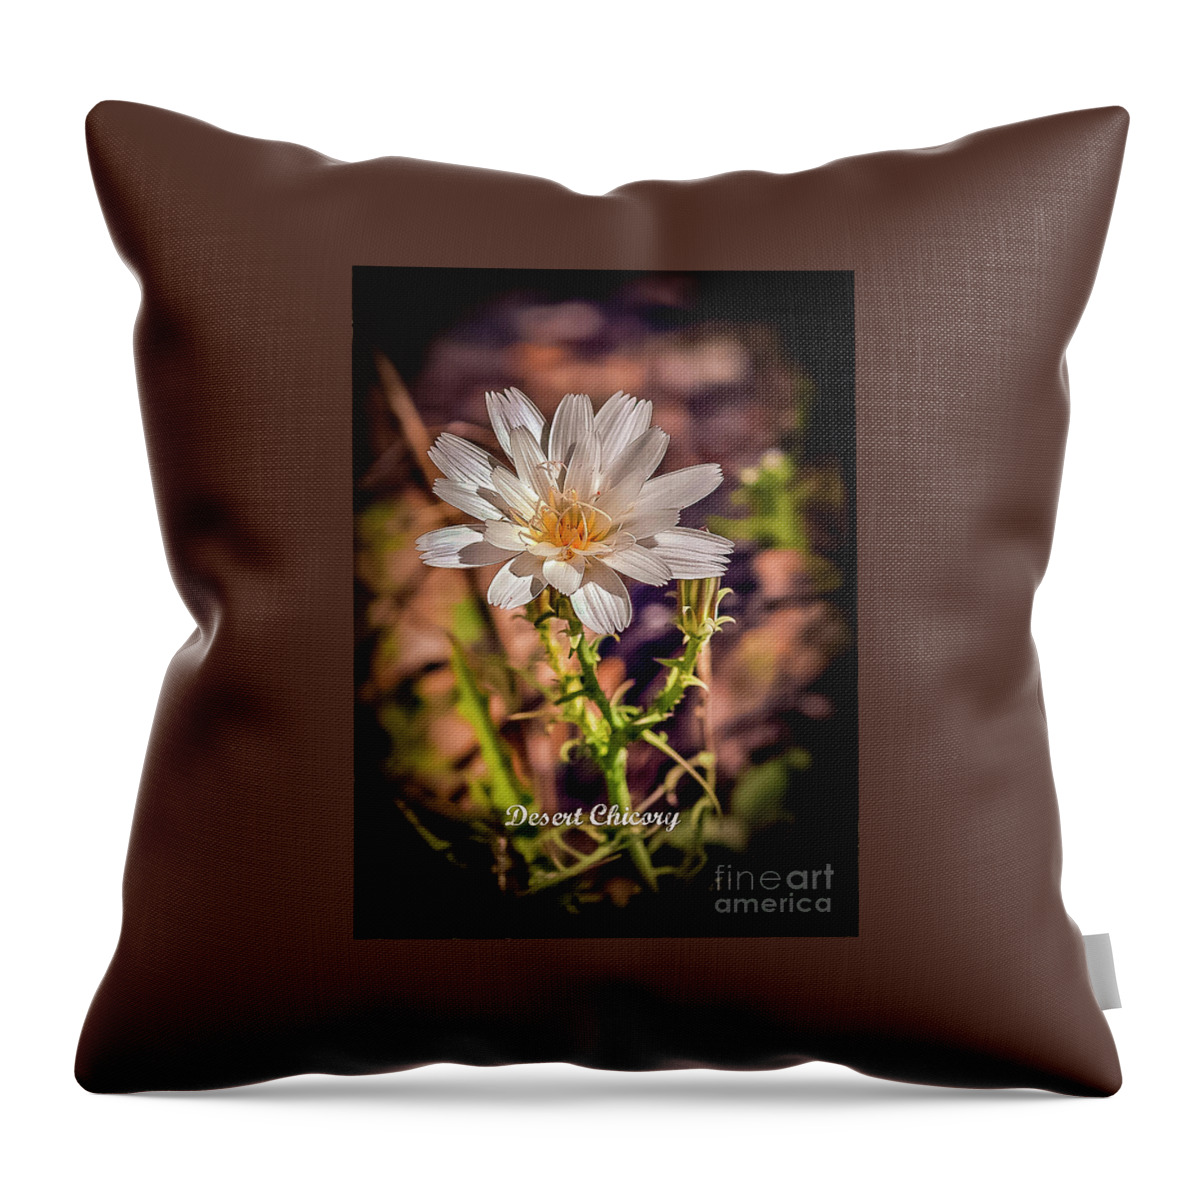 Plants Throw Pillow featuring the photograph A Desert Chicory by Robert Bales